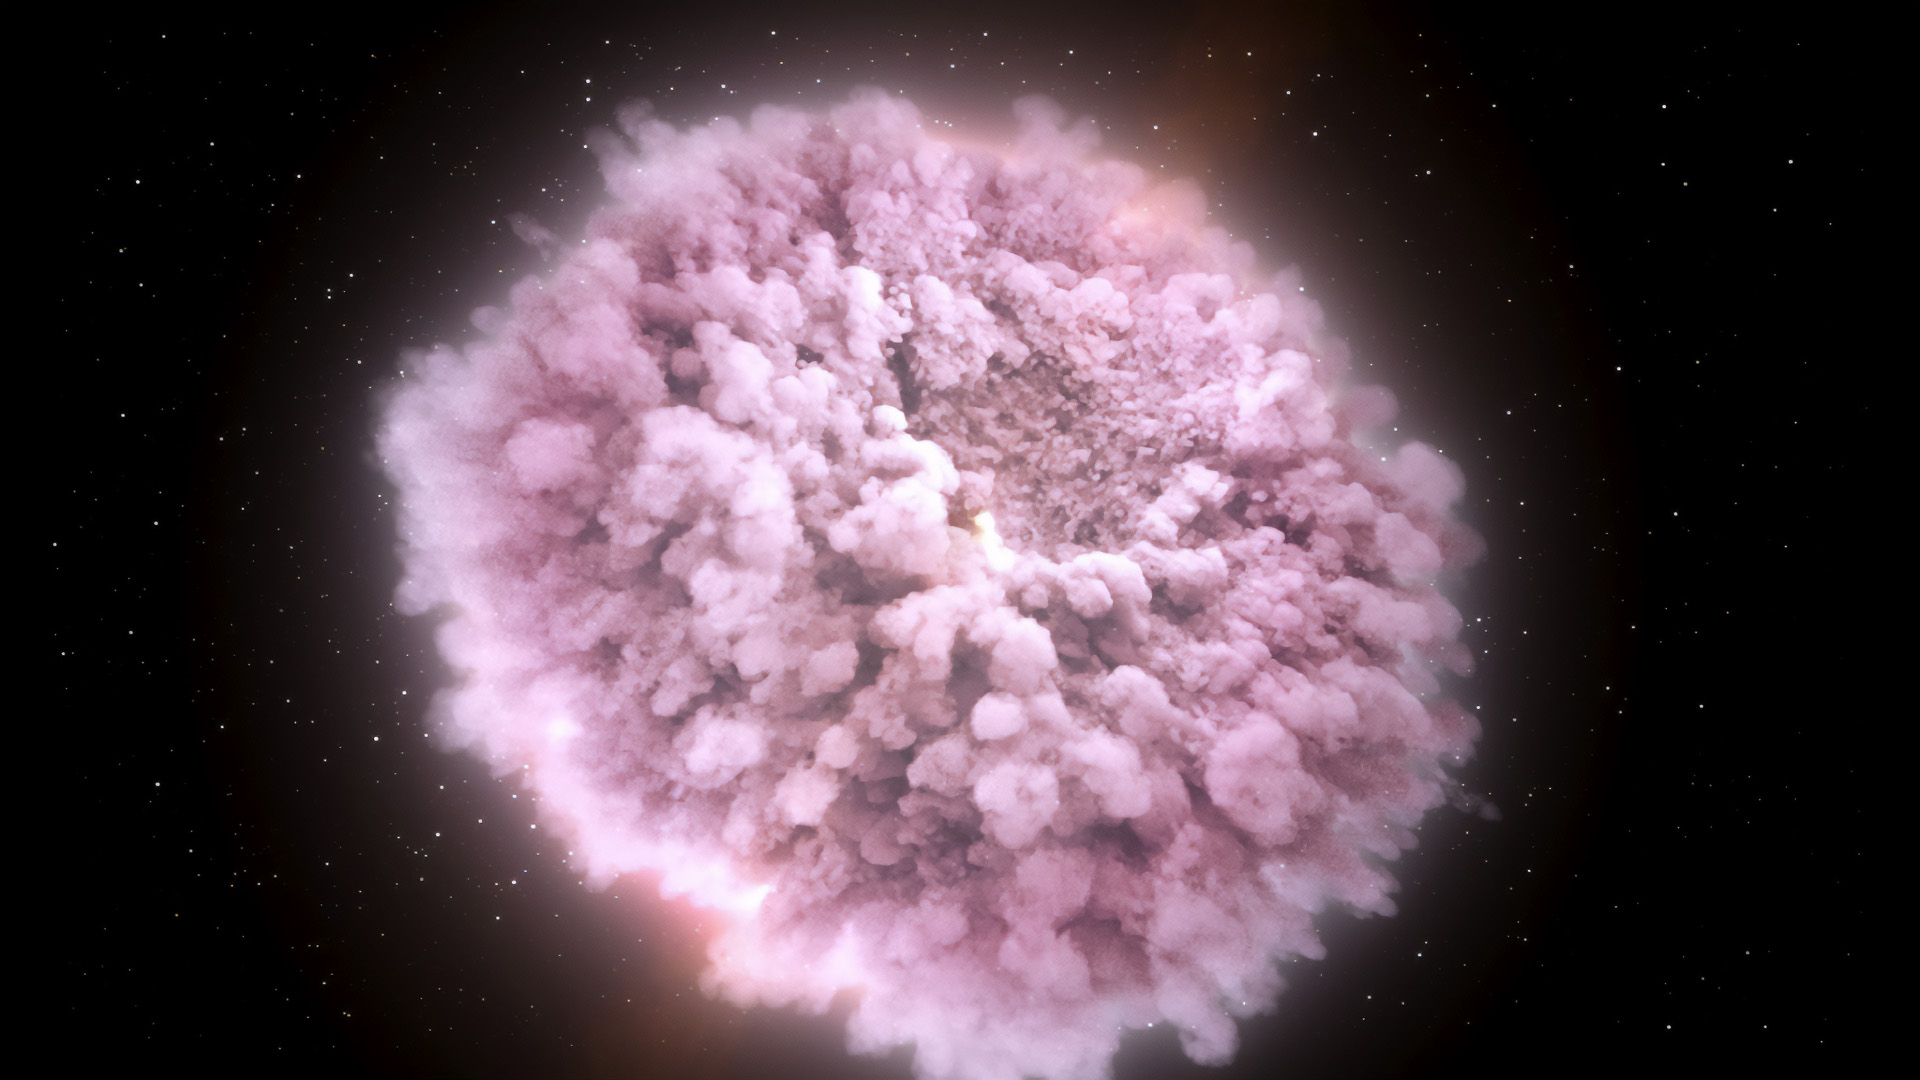 A puffy pink cloud on a background of stars